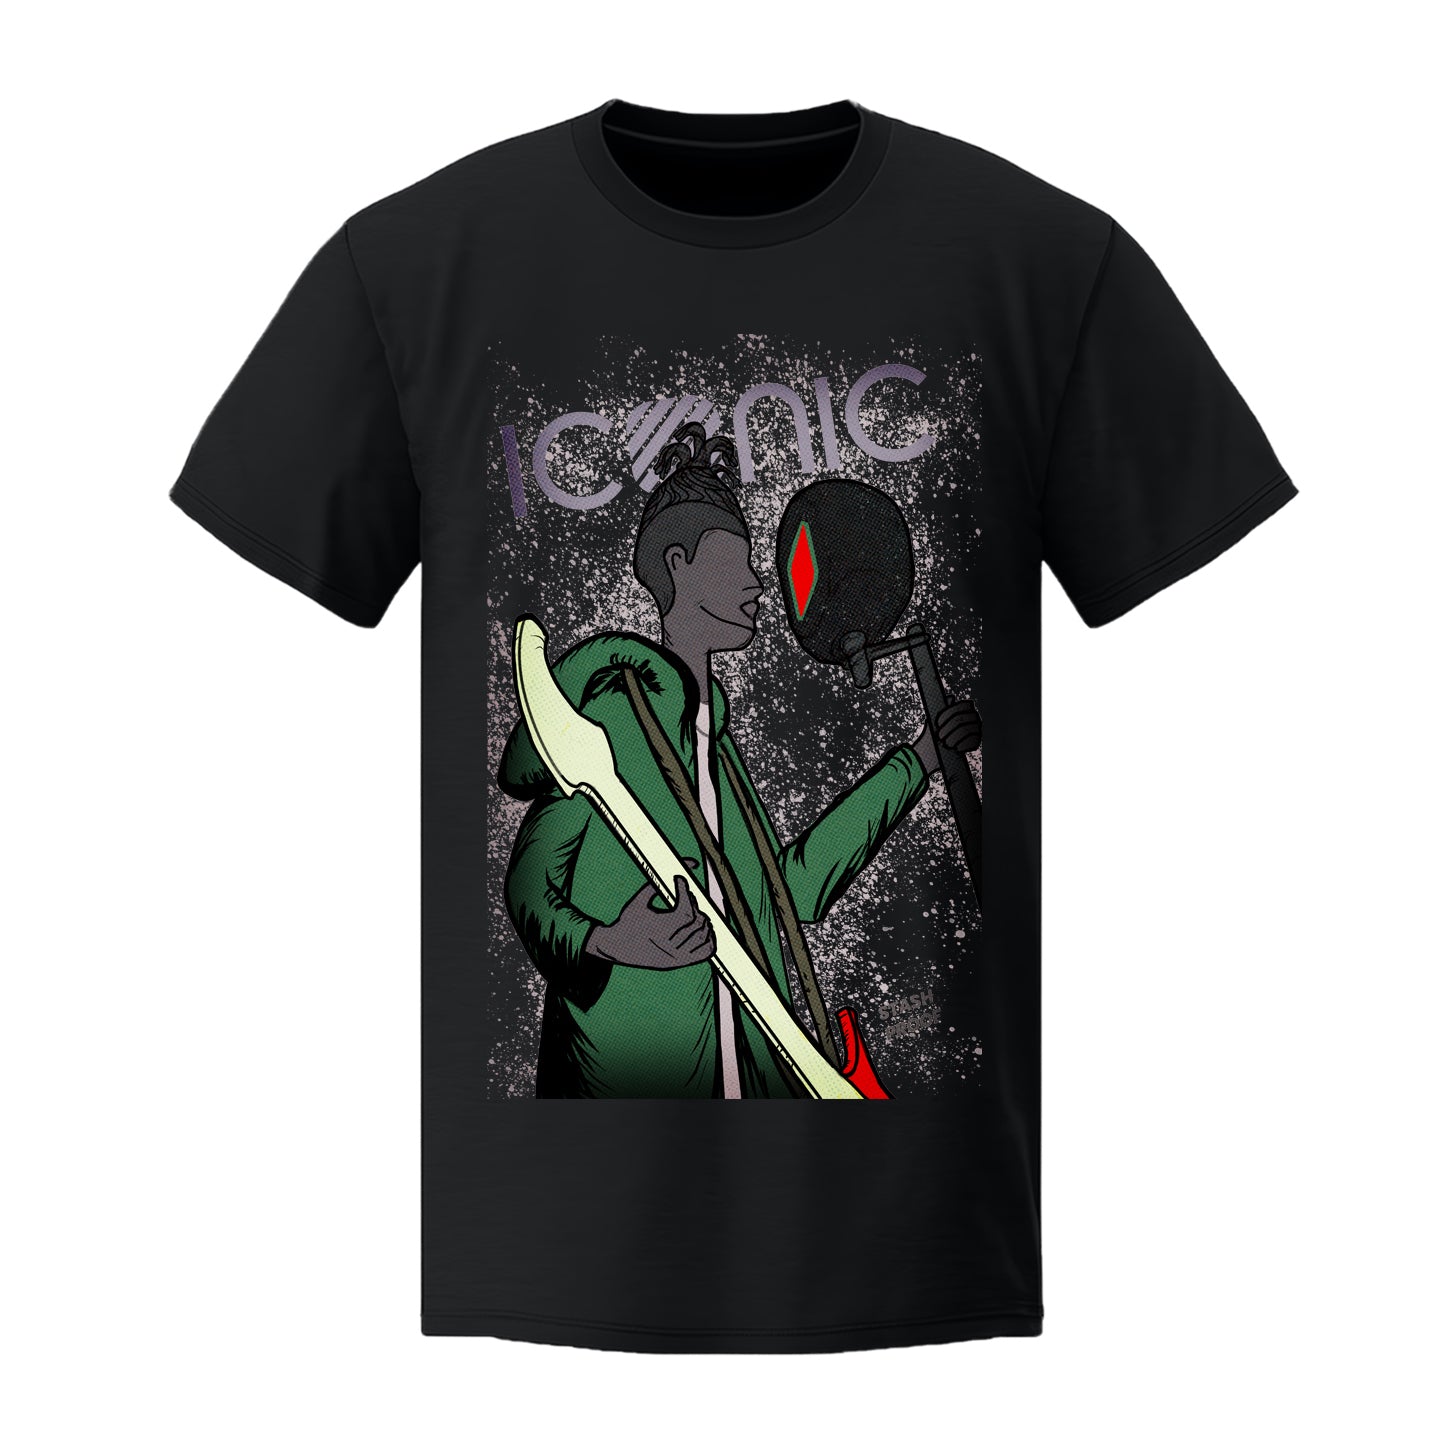 Iconic Mars x Stash Proof Collaboration T-shirt, character is wearing green sweater with purple background